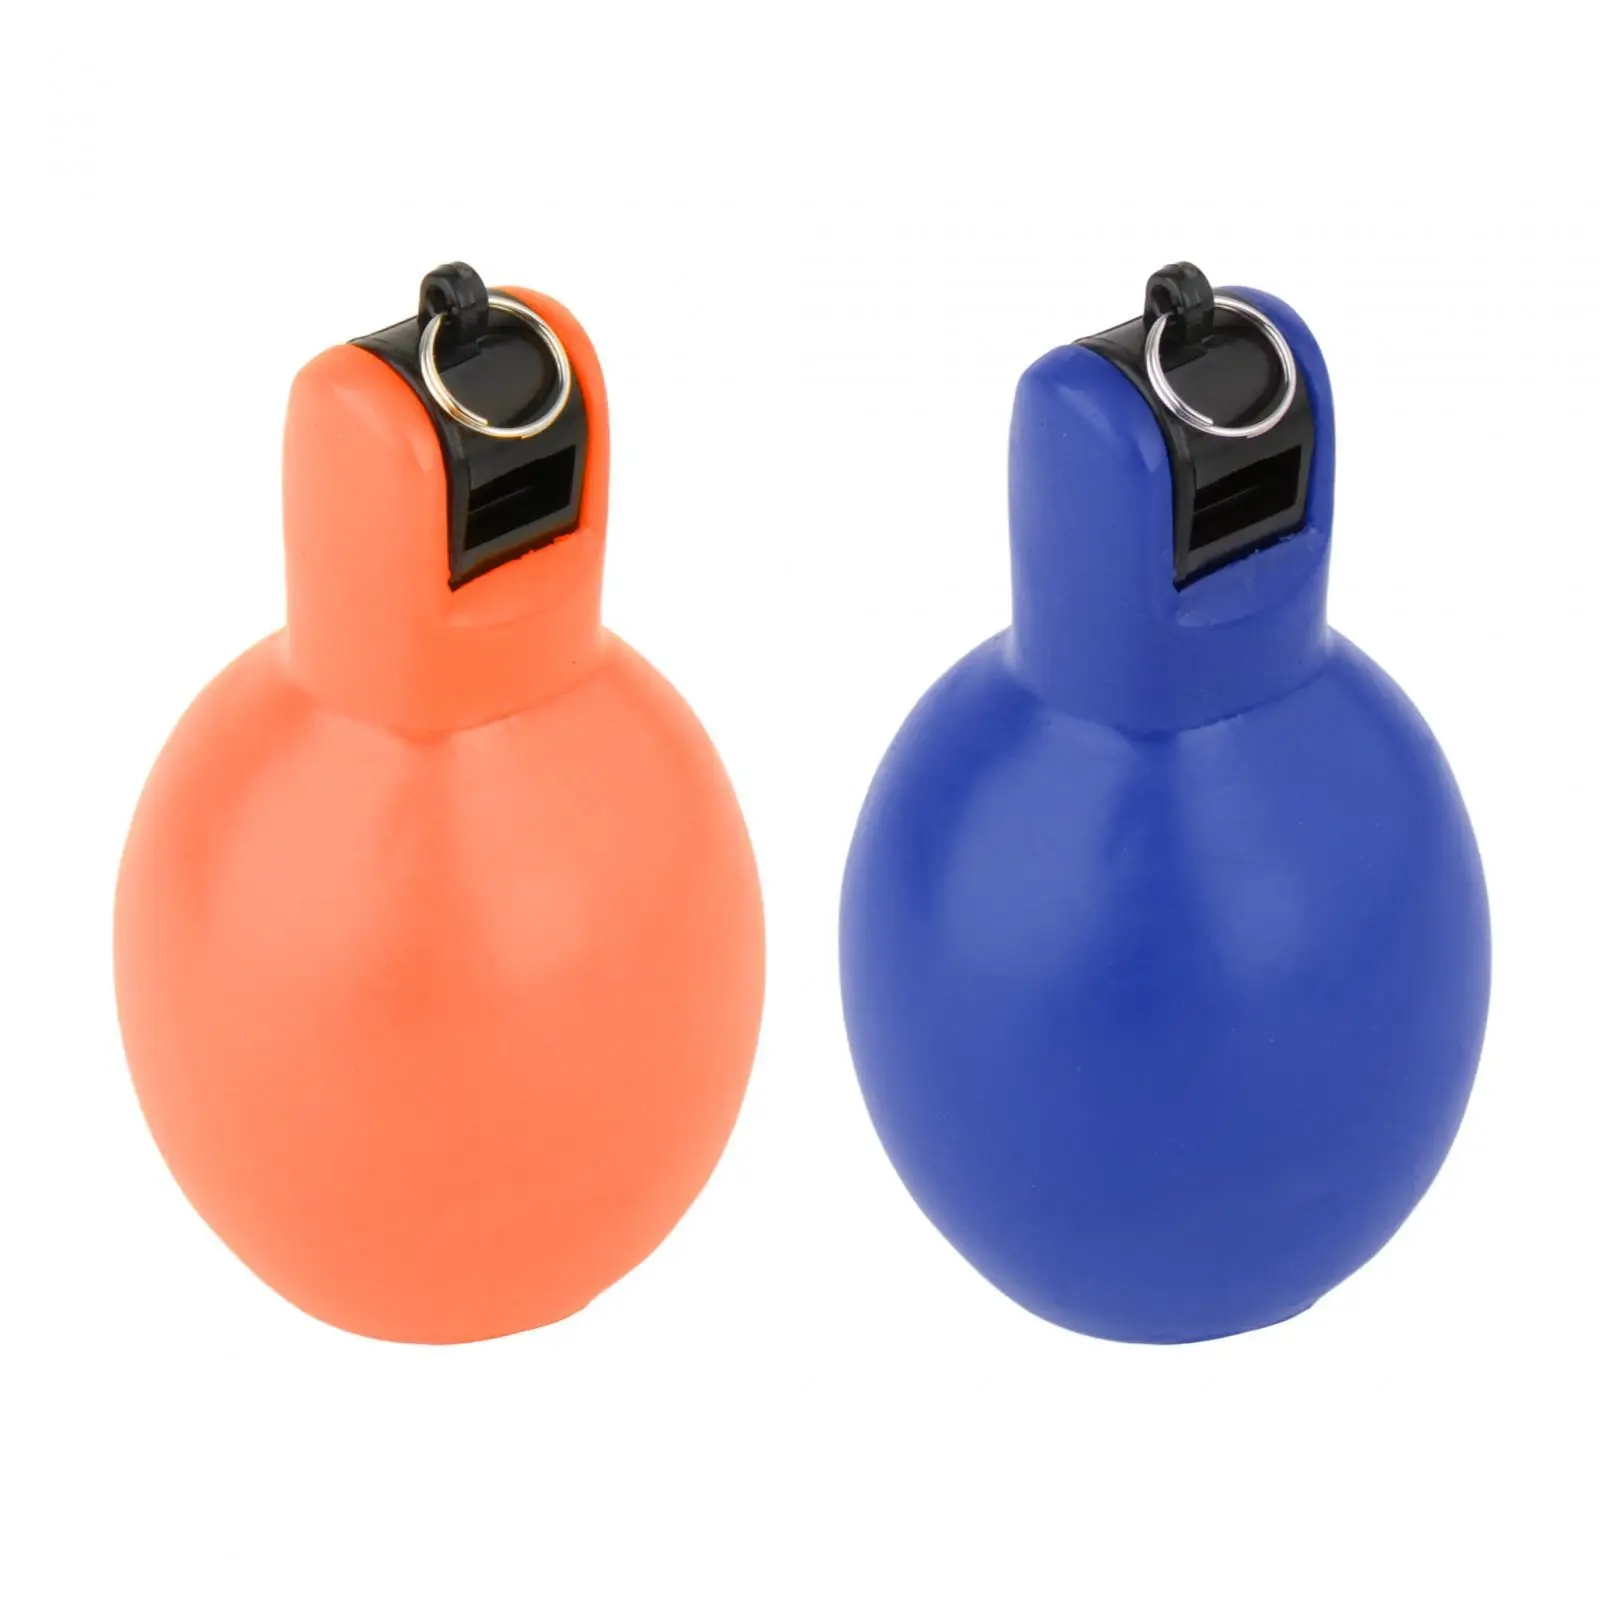 2x Hand Squeeze Whistles Lightweight Loud Sound Handheld Sports Whistle for